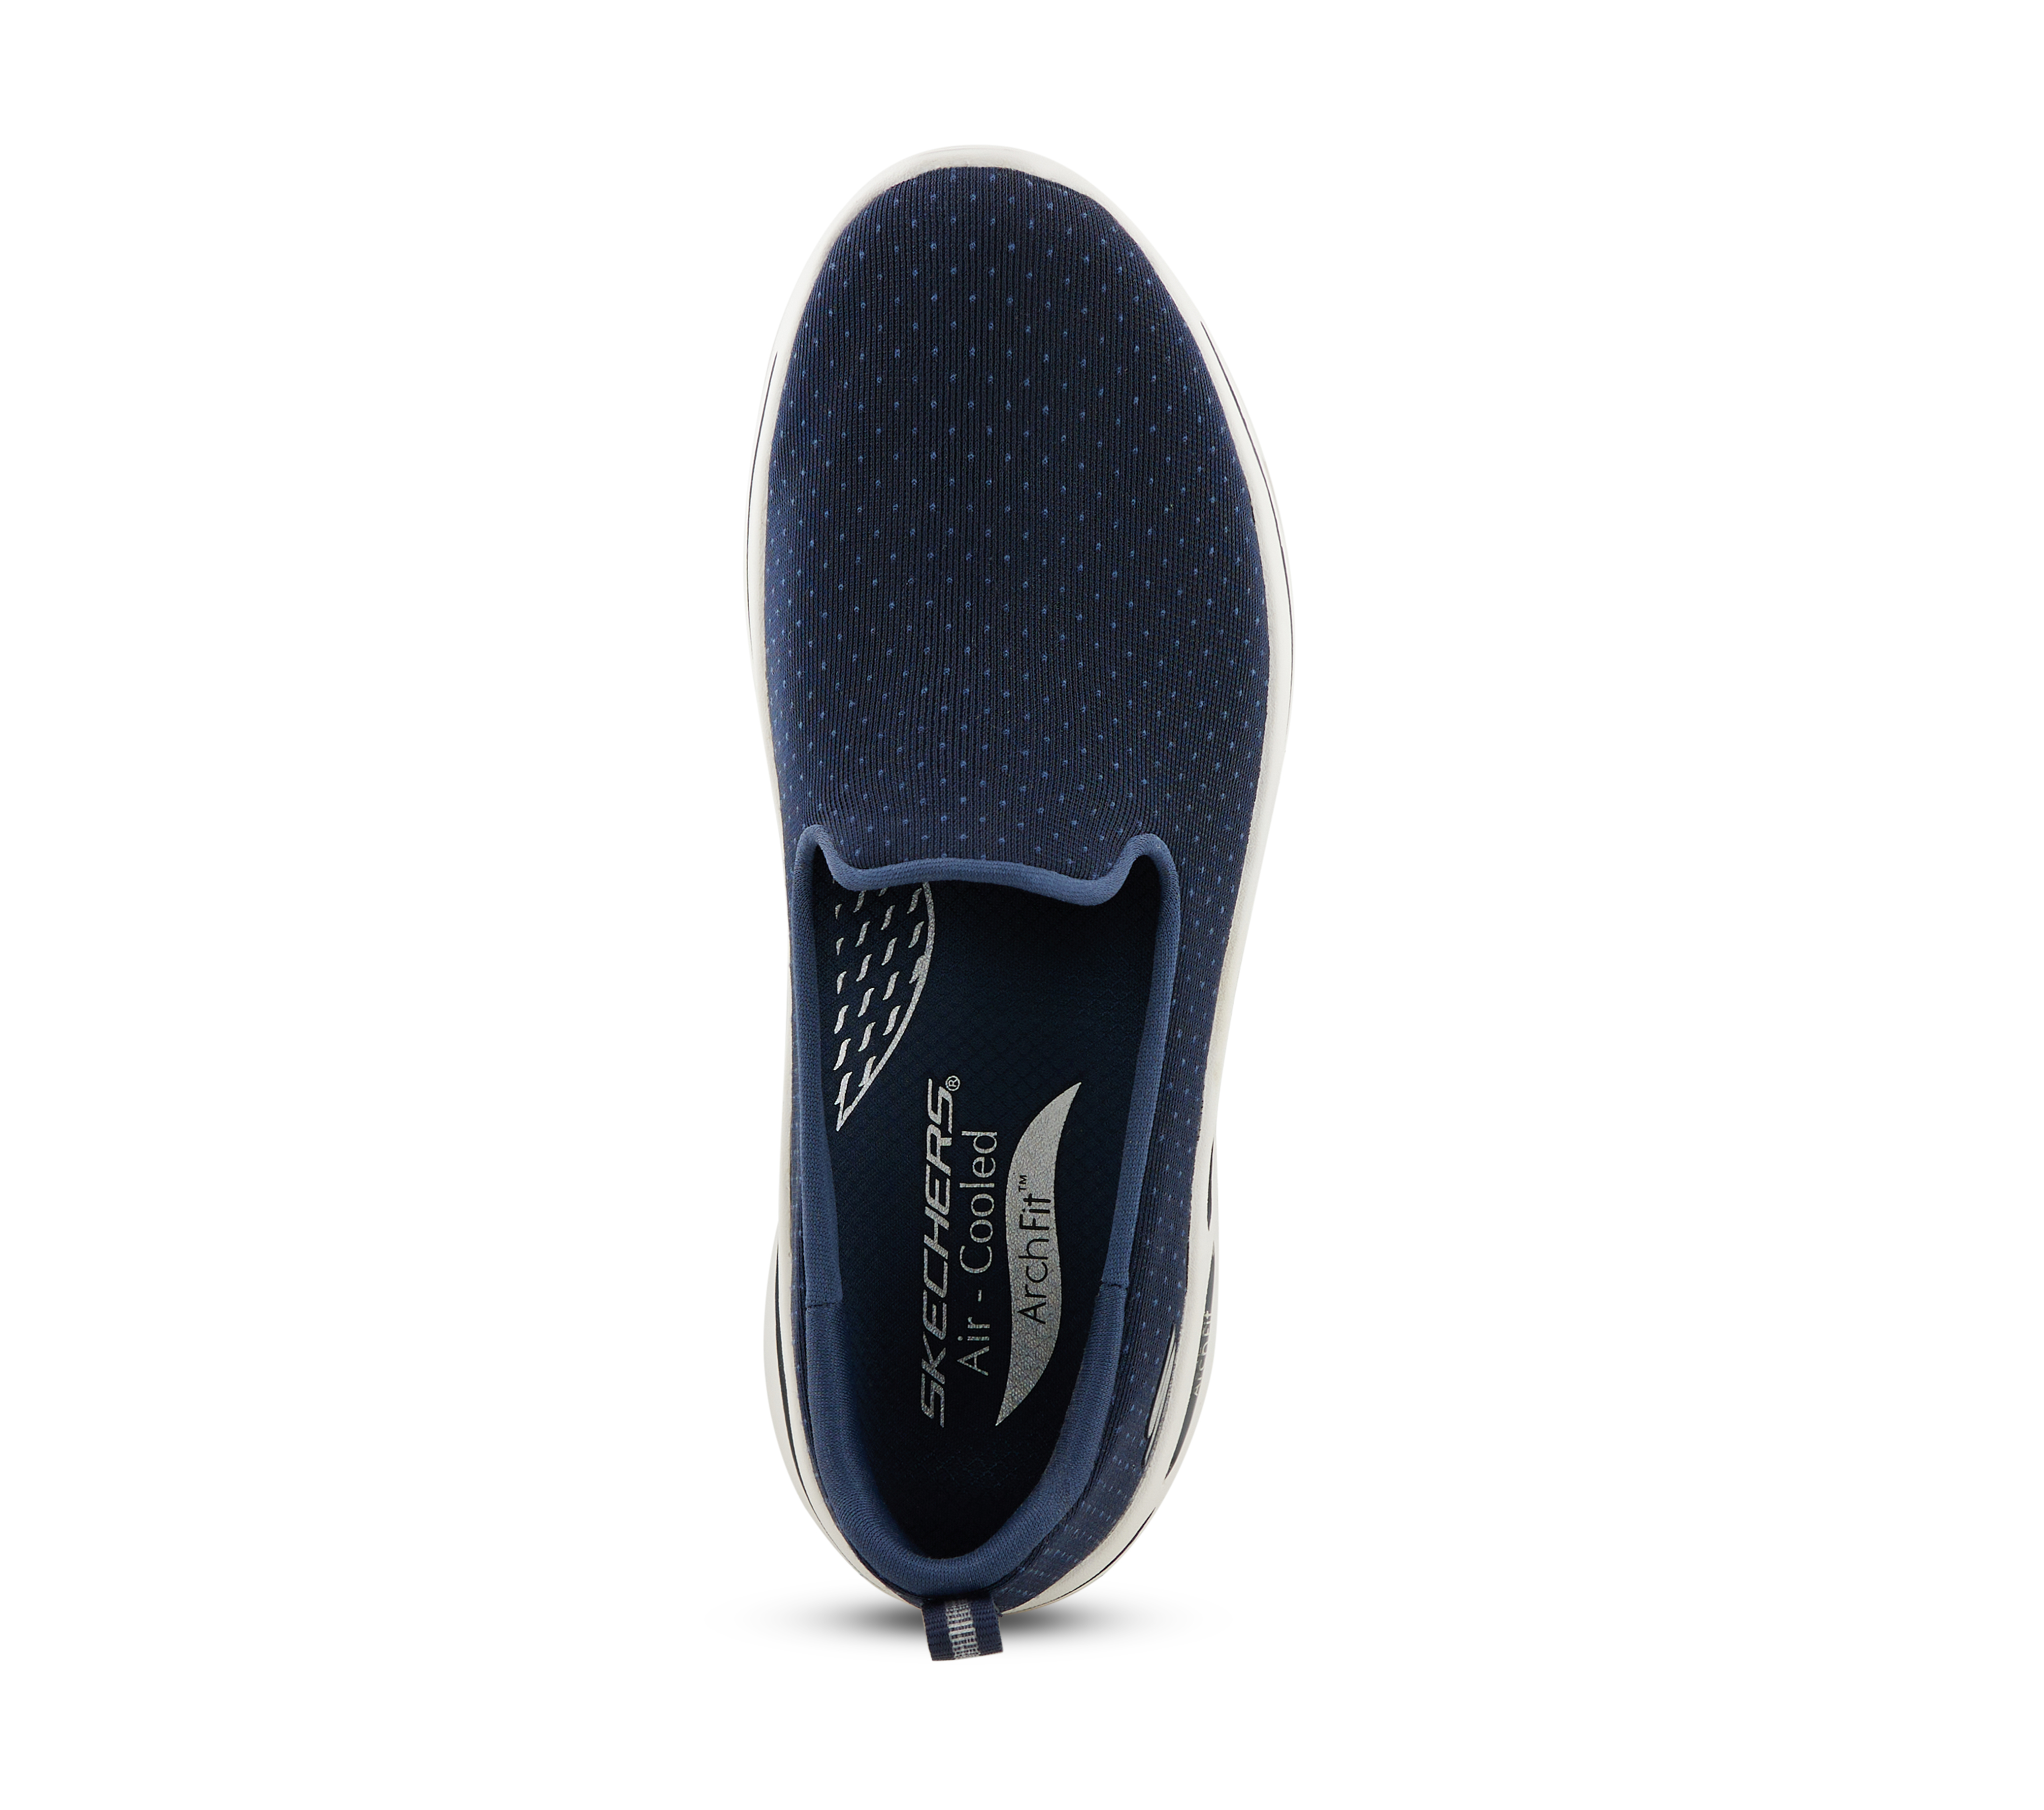 GO WALK ARCH FIT - MORNING ST, NNNAVY Footwear Top View